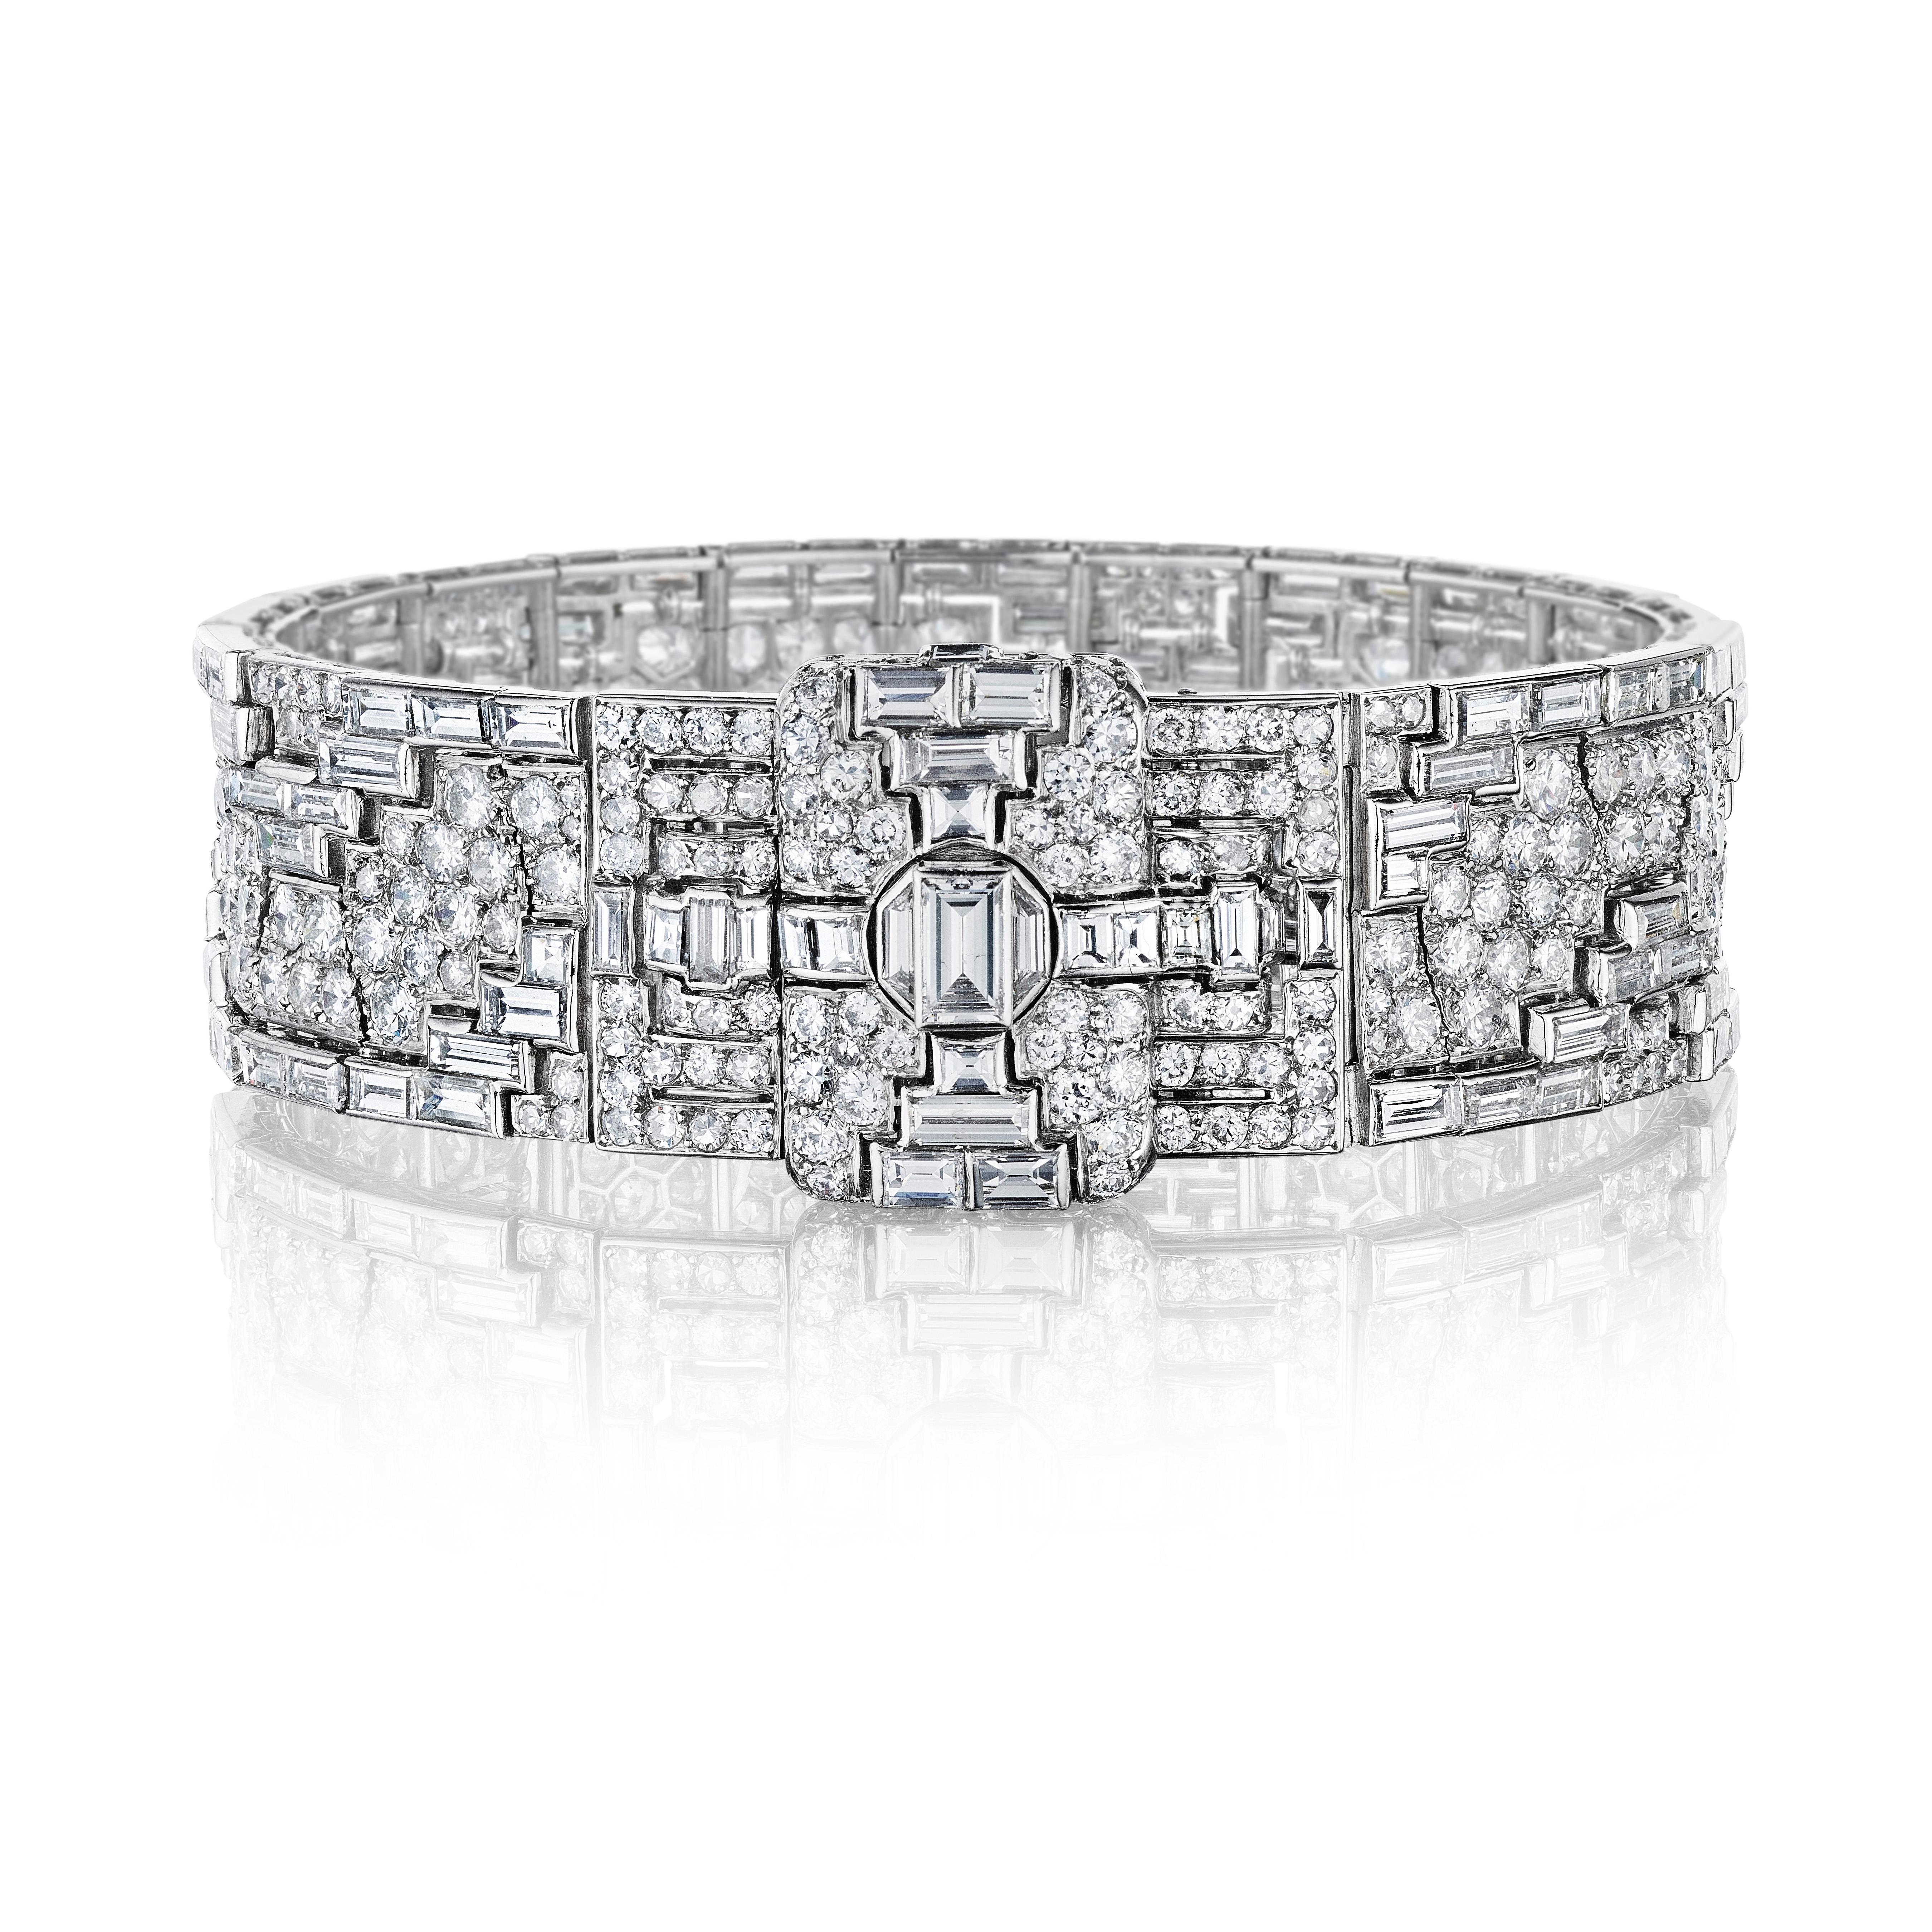 A flexible strap bracelet of geometric design with a repeating stepped pattern set with baguette diamonds within a ground of pavé-set diamonds, completed by a rectangular clasp of similar design; mounted in platinum
• 427 round and baguette